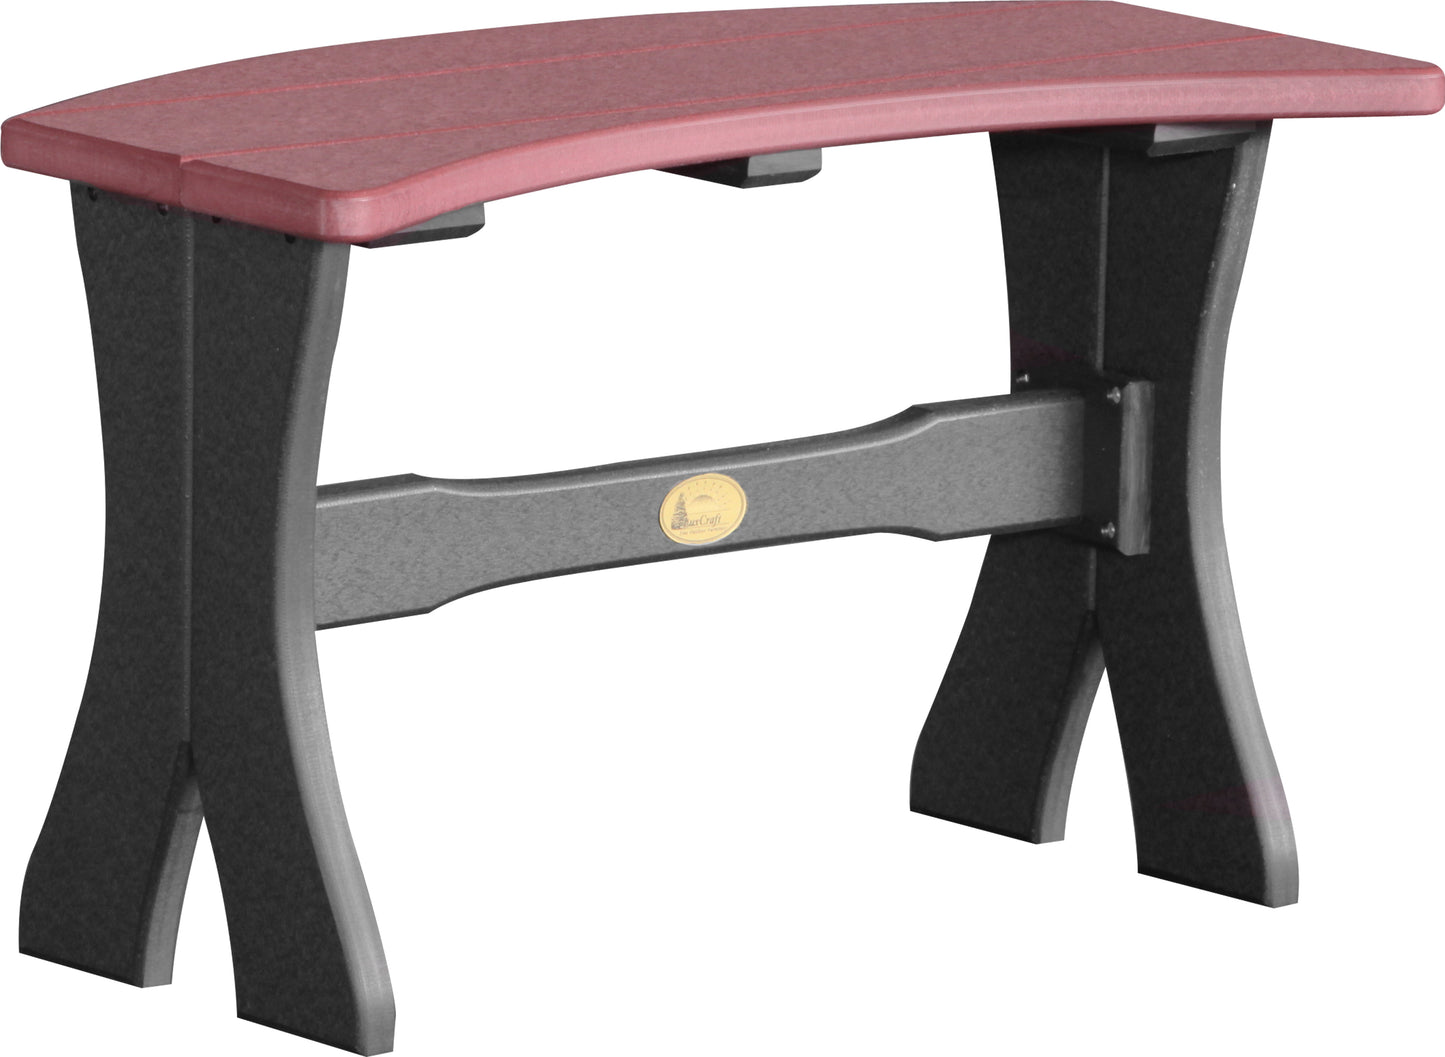 LuxCraft Recycled Plastic 28" Dining Height Table Bench - LEAD TIME TO SHIP 3 TO 4 WEEKS